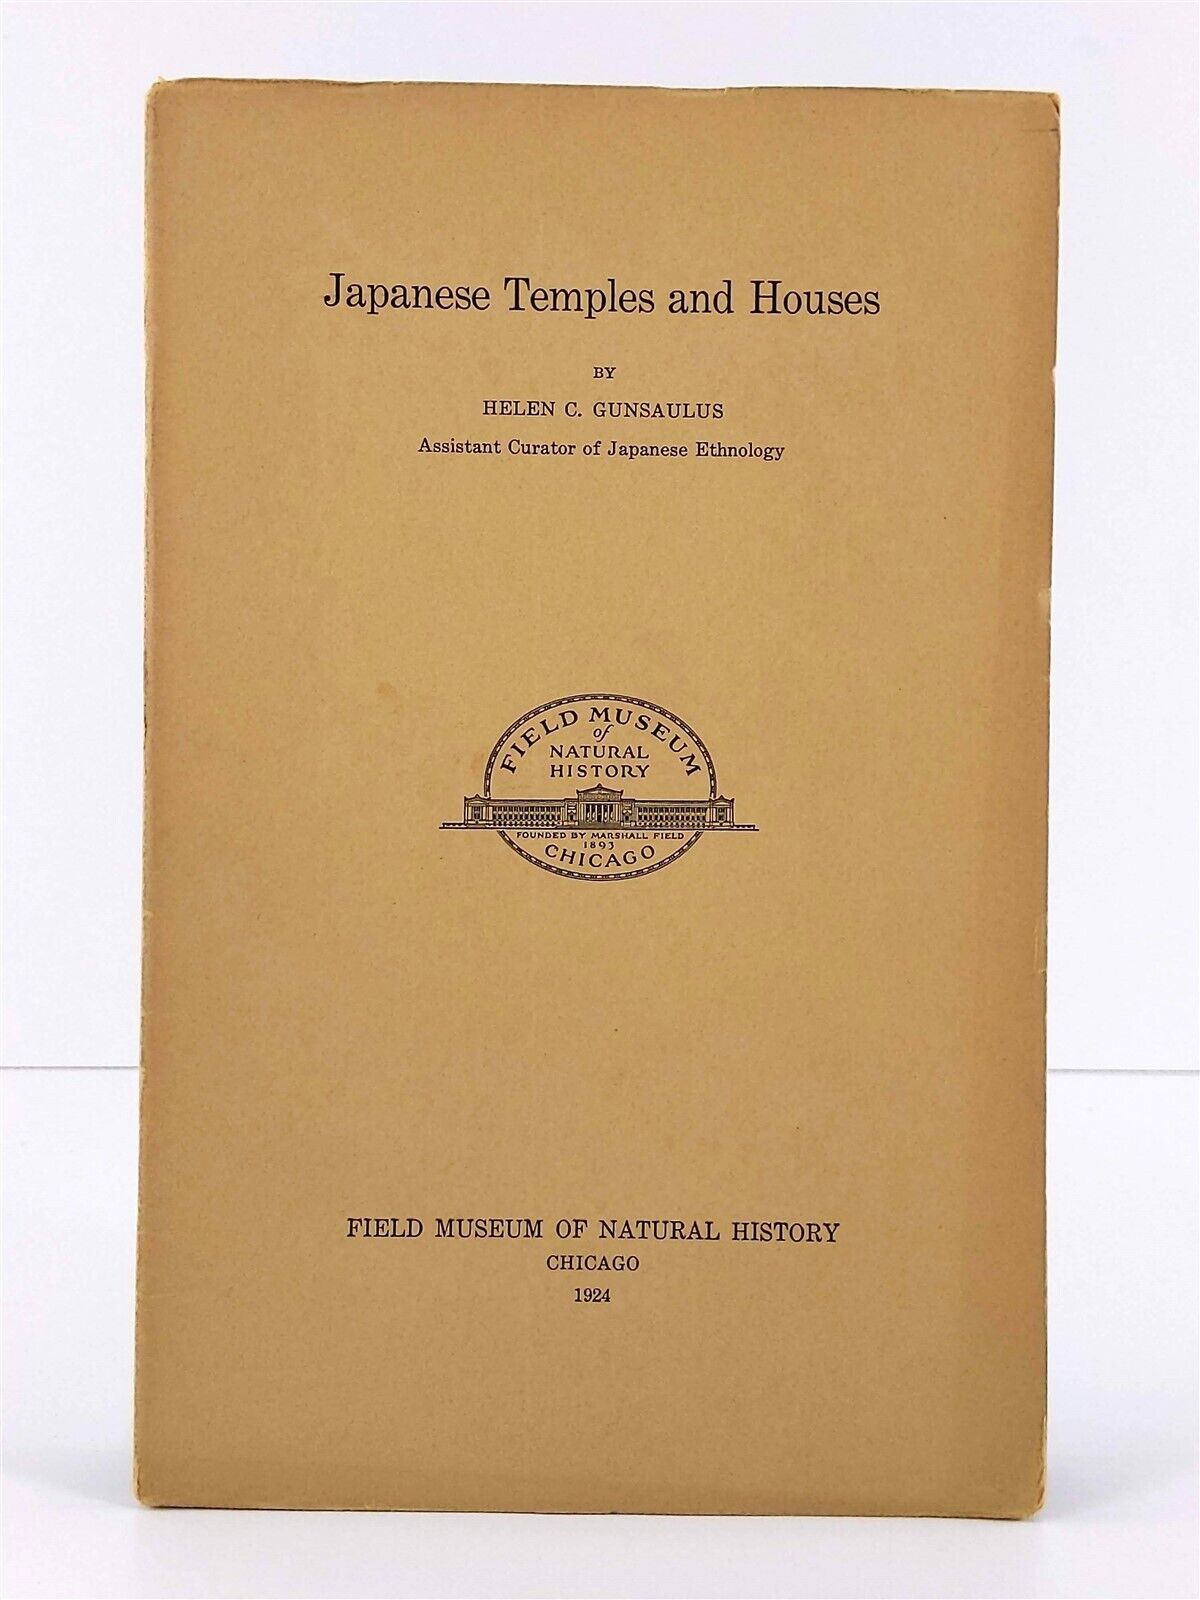 Japanese Temples and Houses Helen Gunsaulus 1924 Field Museum Chicago Booklet